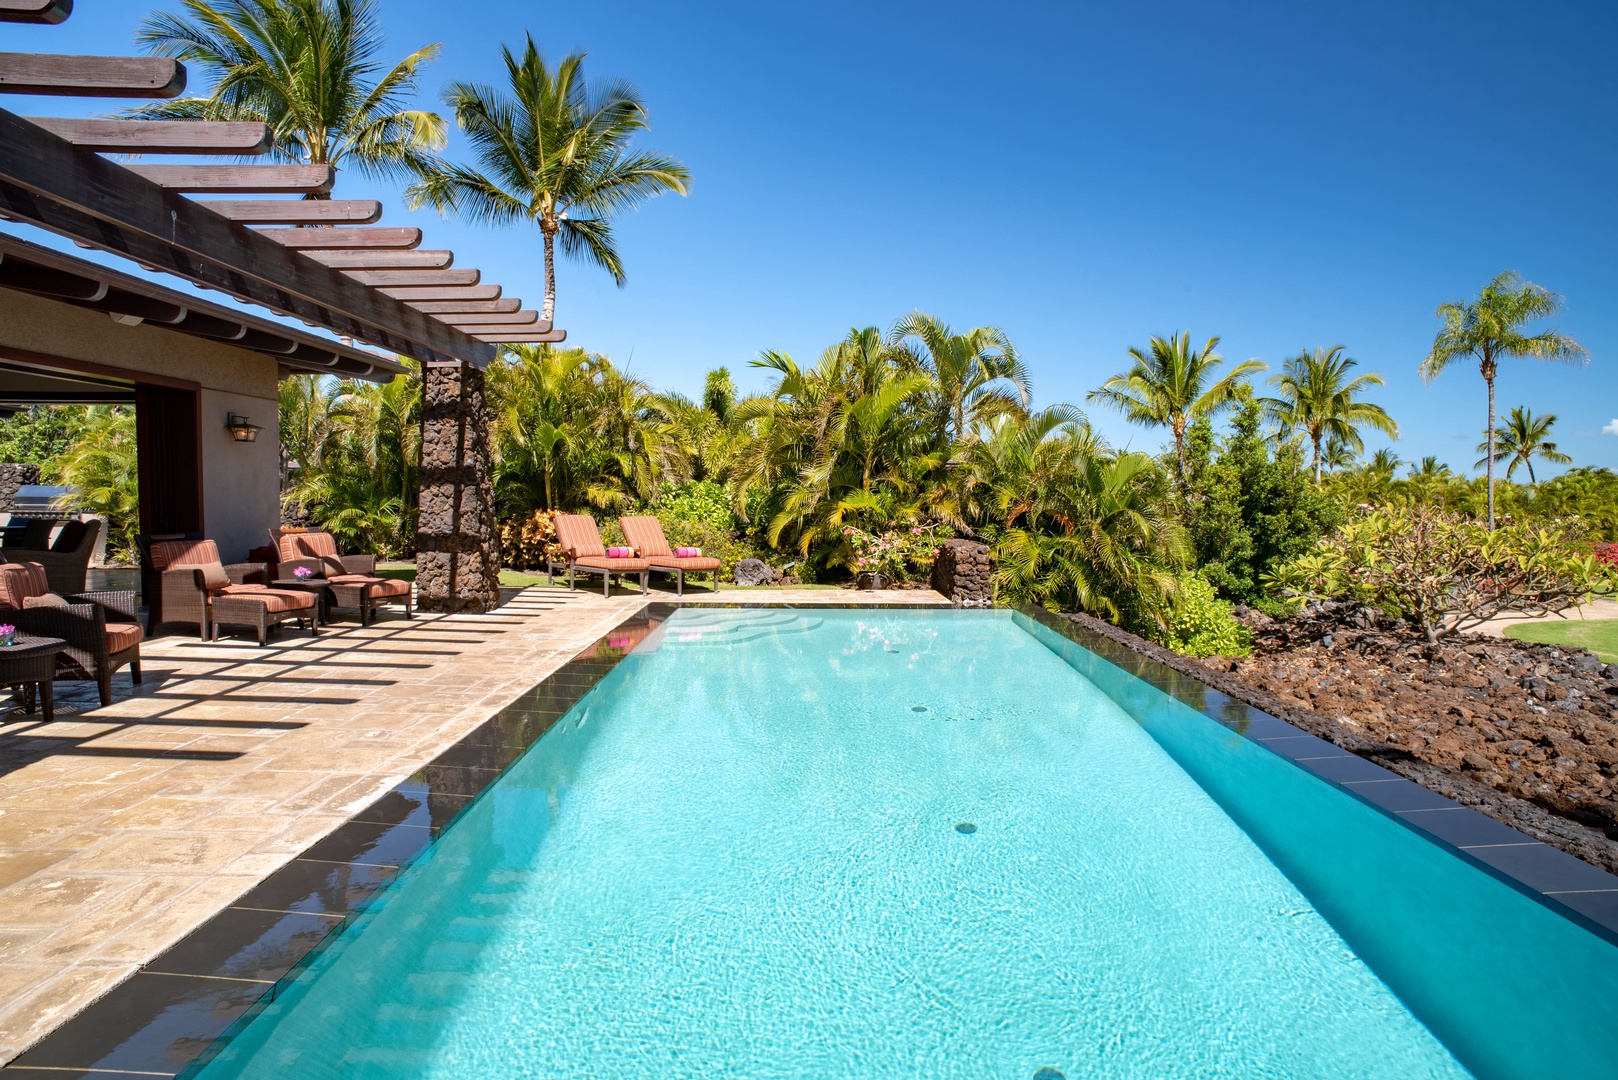 Kamuela Vacation Rentals, House of the Turtle at Champion Ridge, Mauna Lani (CR 18) - Take a Dip in the Heated Infinity Pool